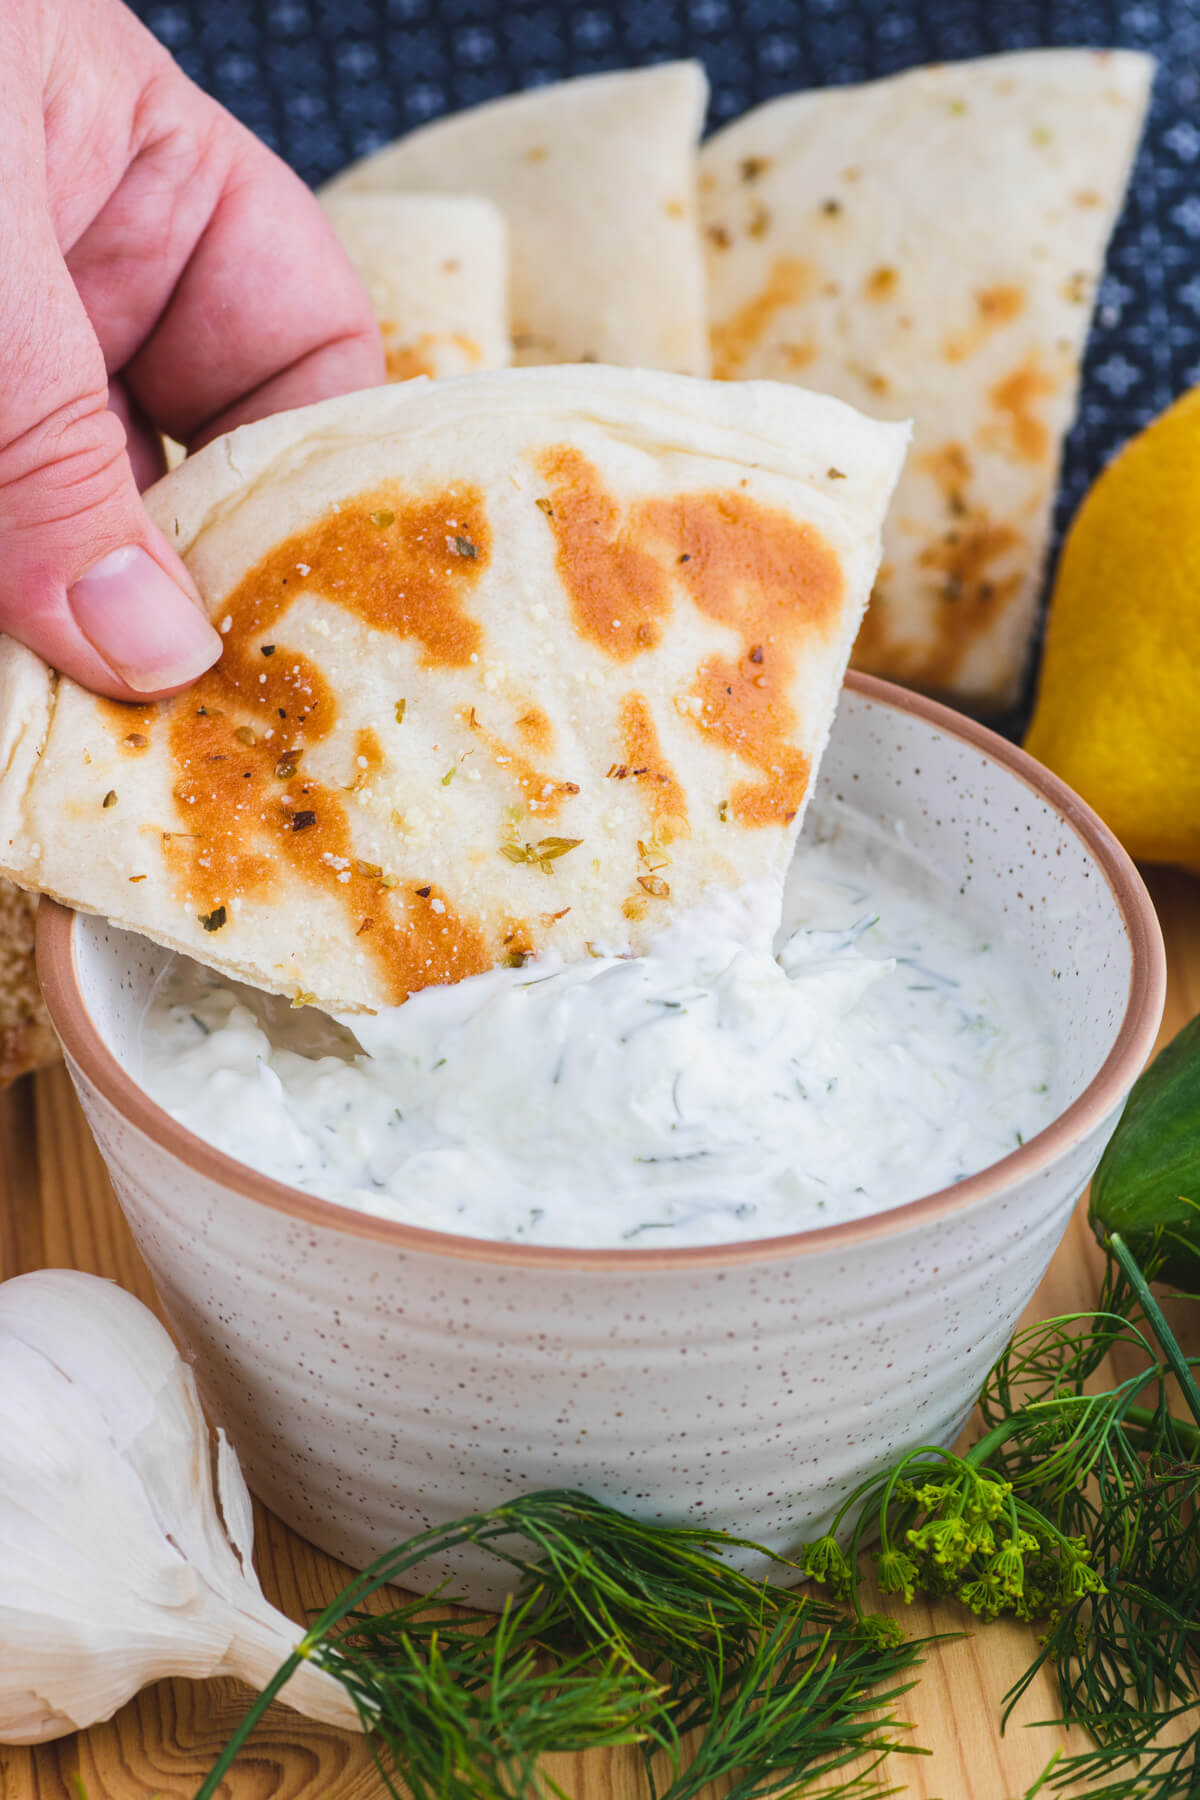 A hand dips a toasted triangle of pita bread in a bowl of creamy tzatziki sauce.